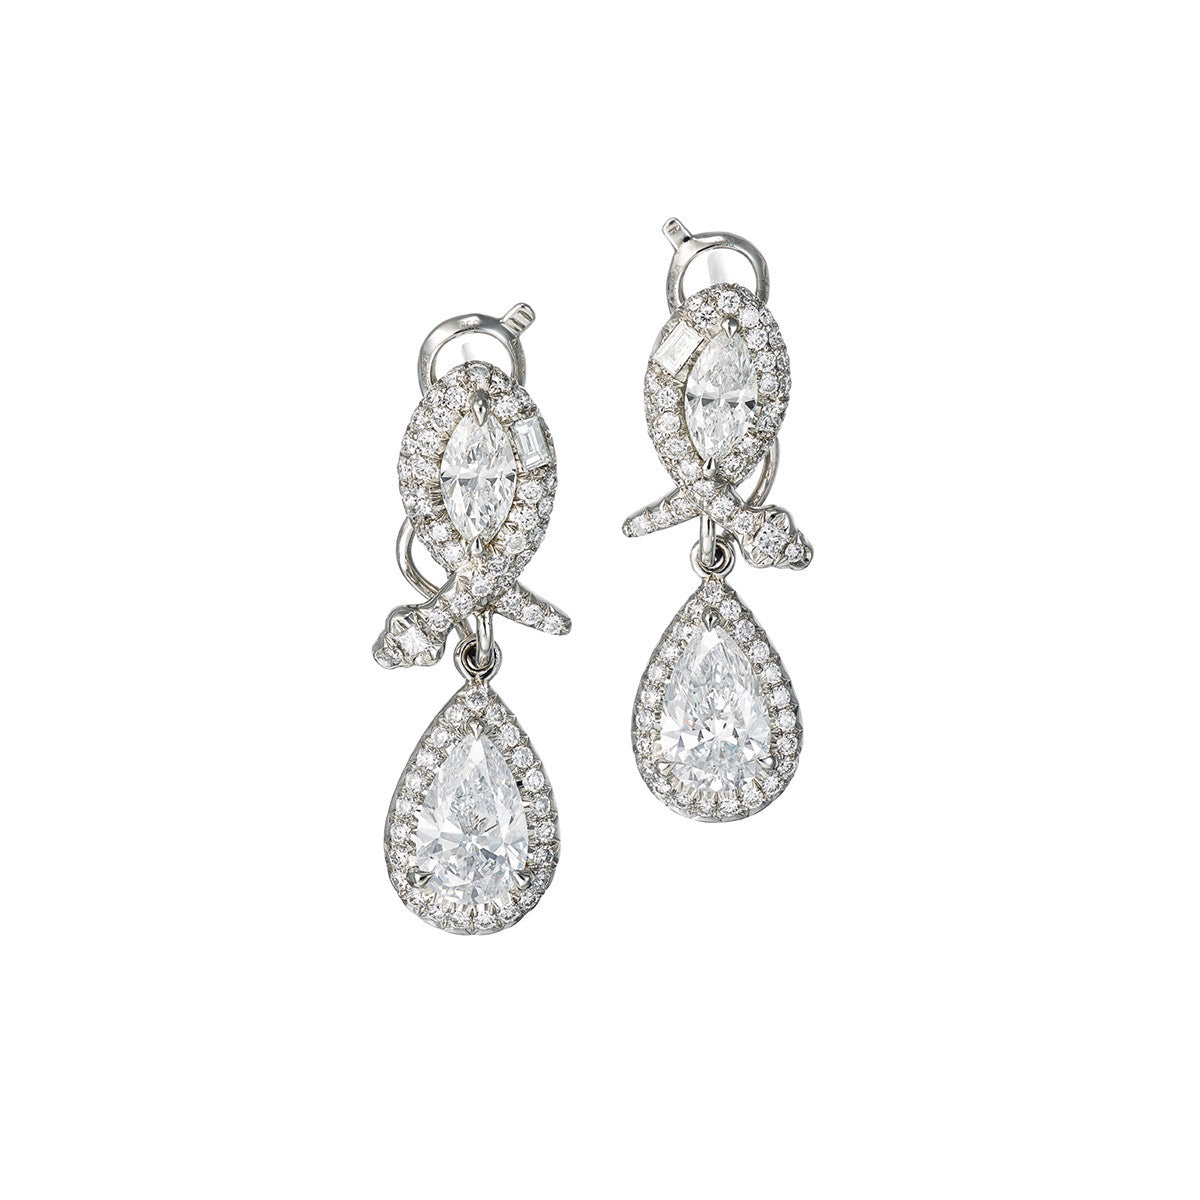 Earrings Platinum with White Diamonds 3.69Cts